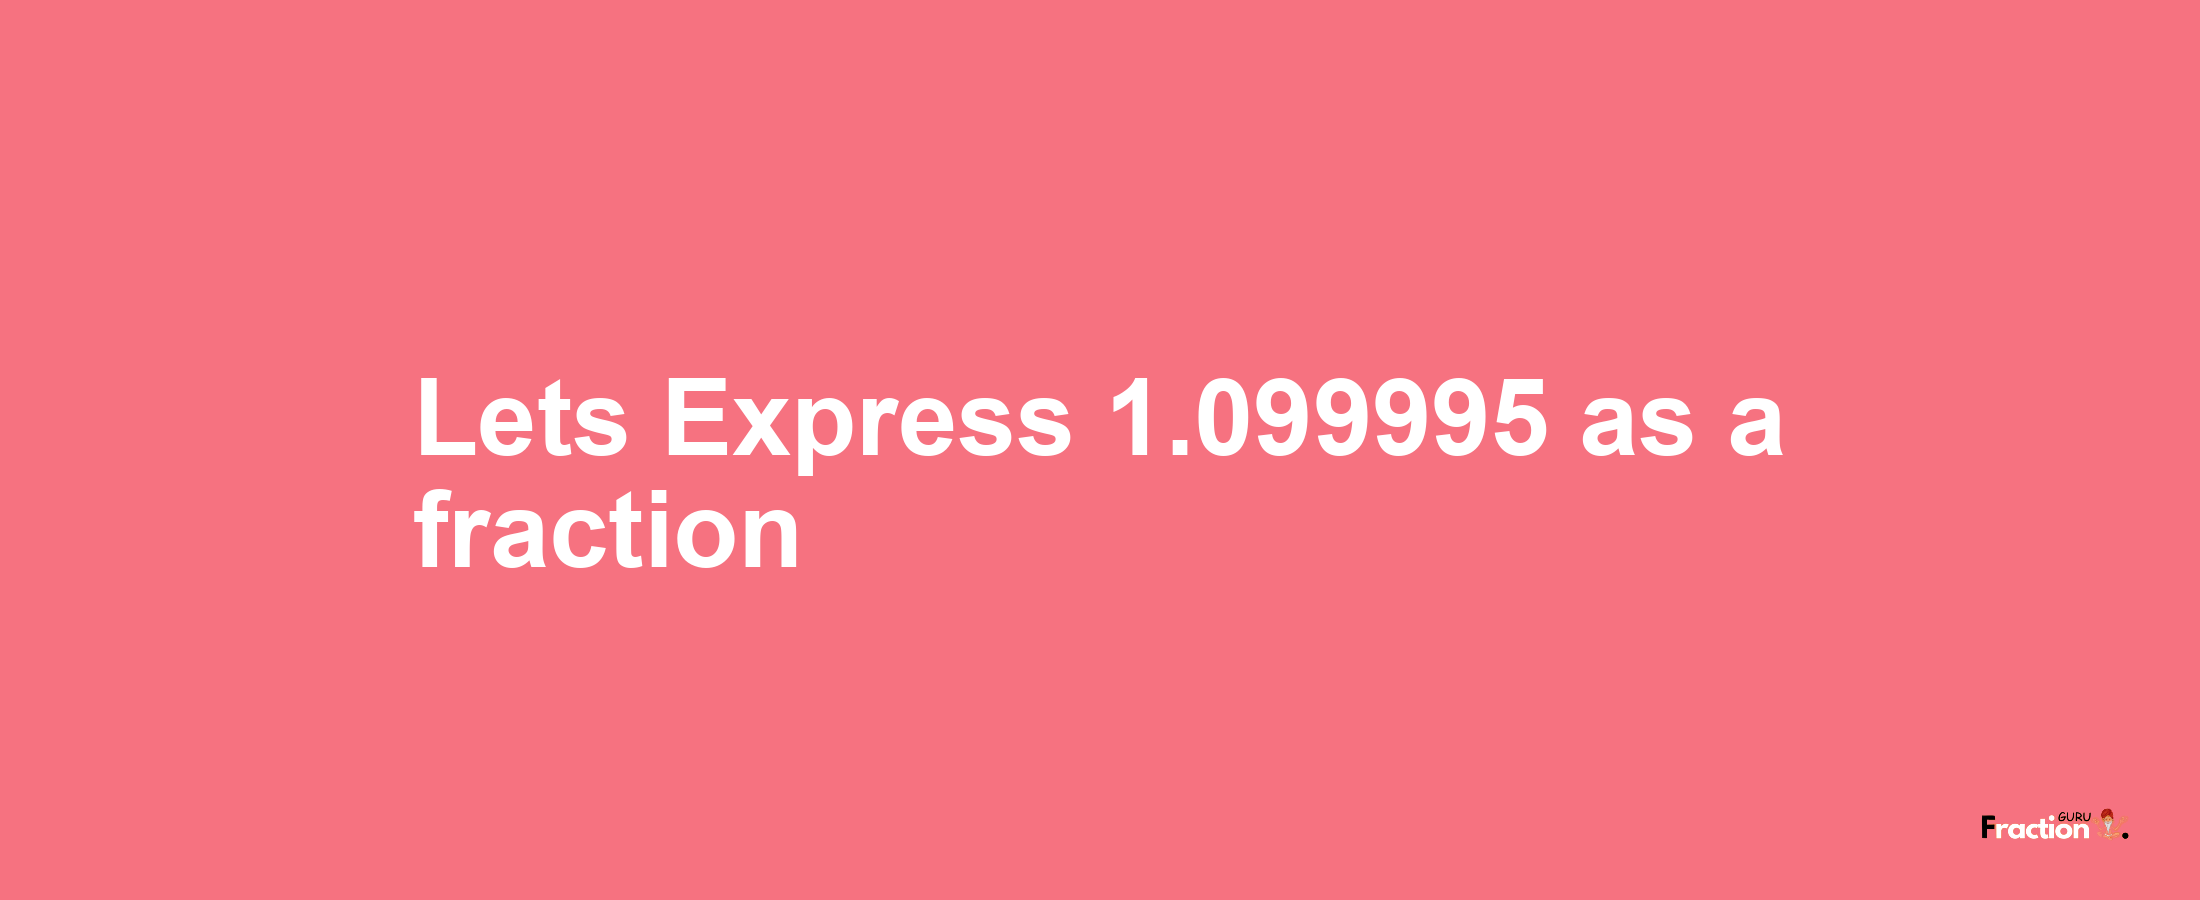 Lets Express 1.099995 as afraction